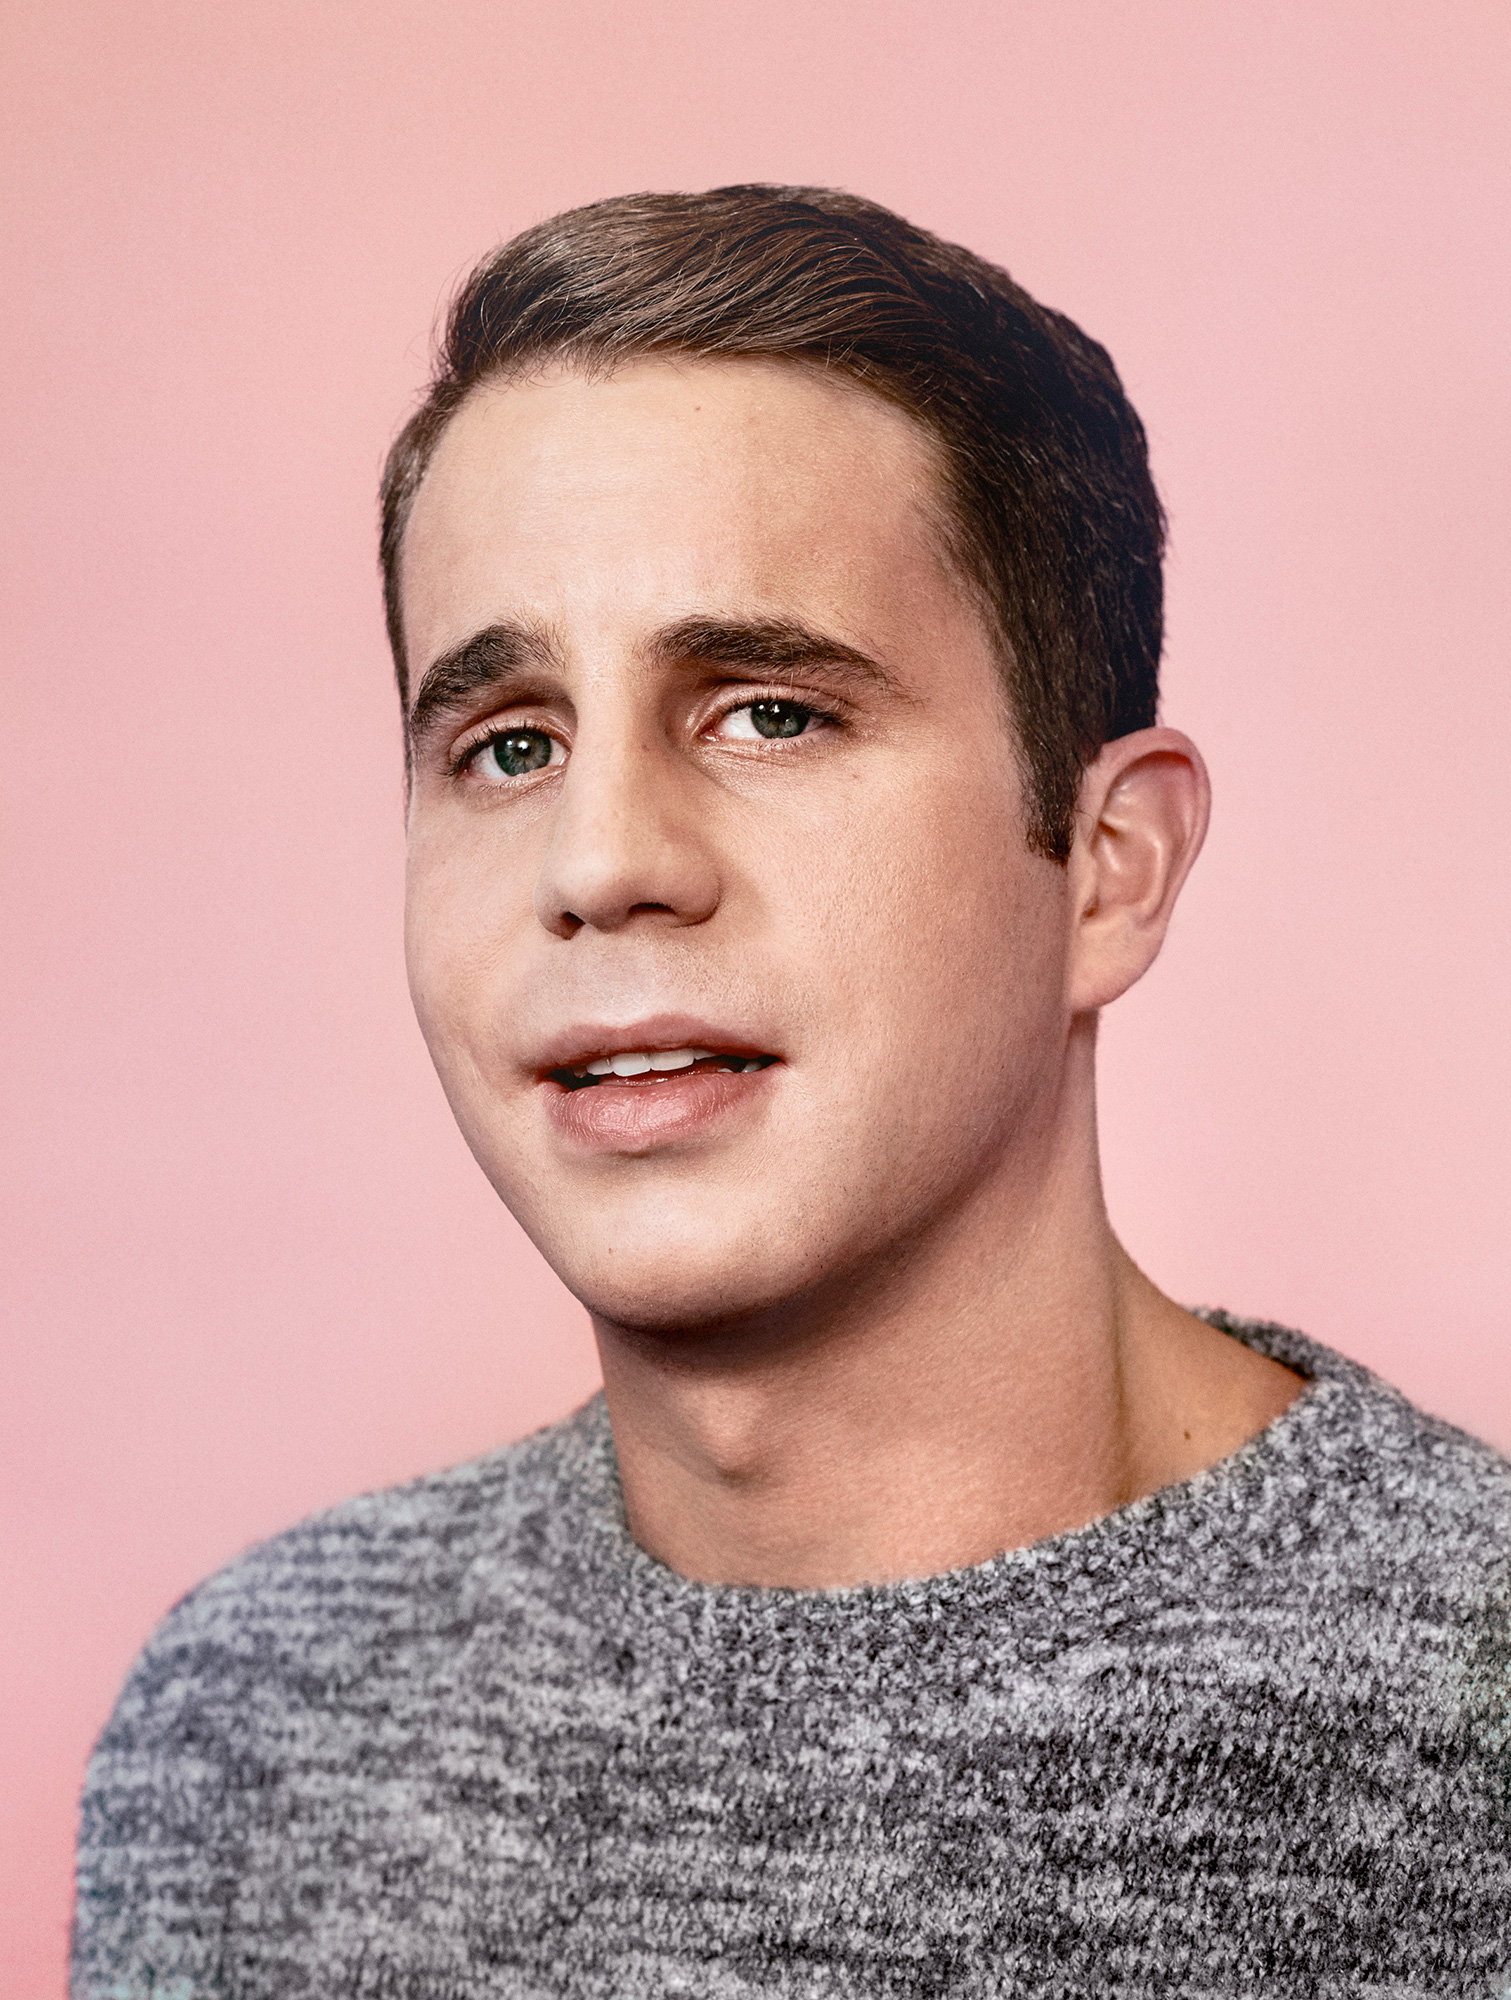 Actor Ben Platt photographed in New York City on Nov. 6, 2016.From  The Best of Culture 2016.  Dec. 19, 2016 issue.